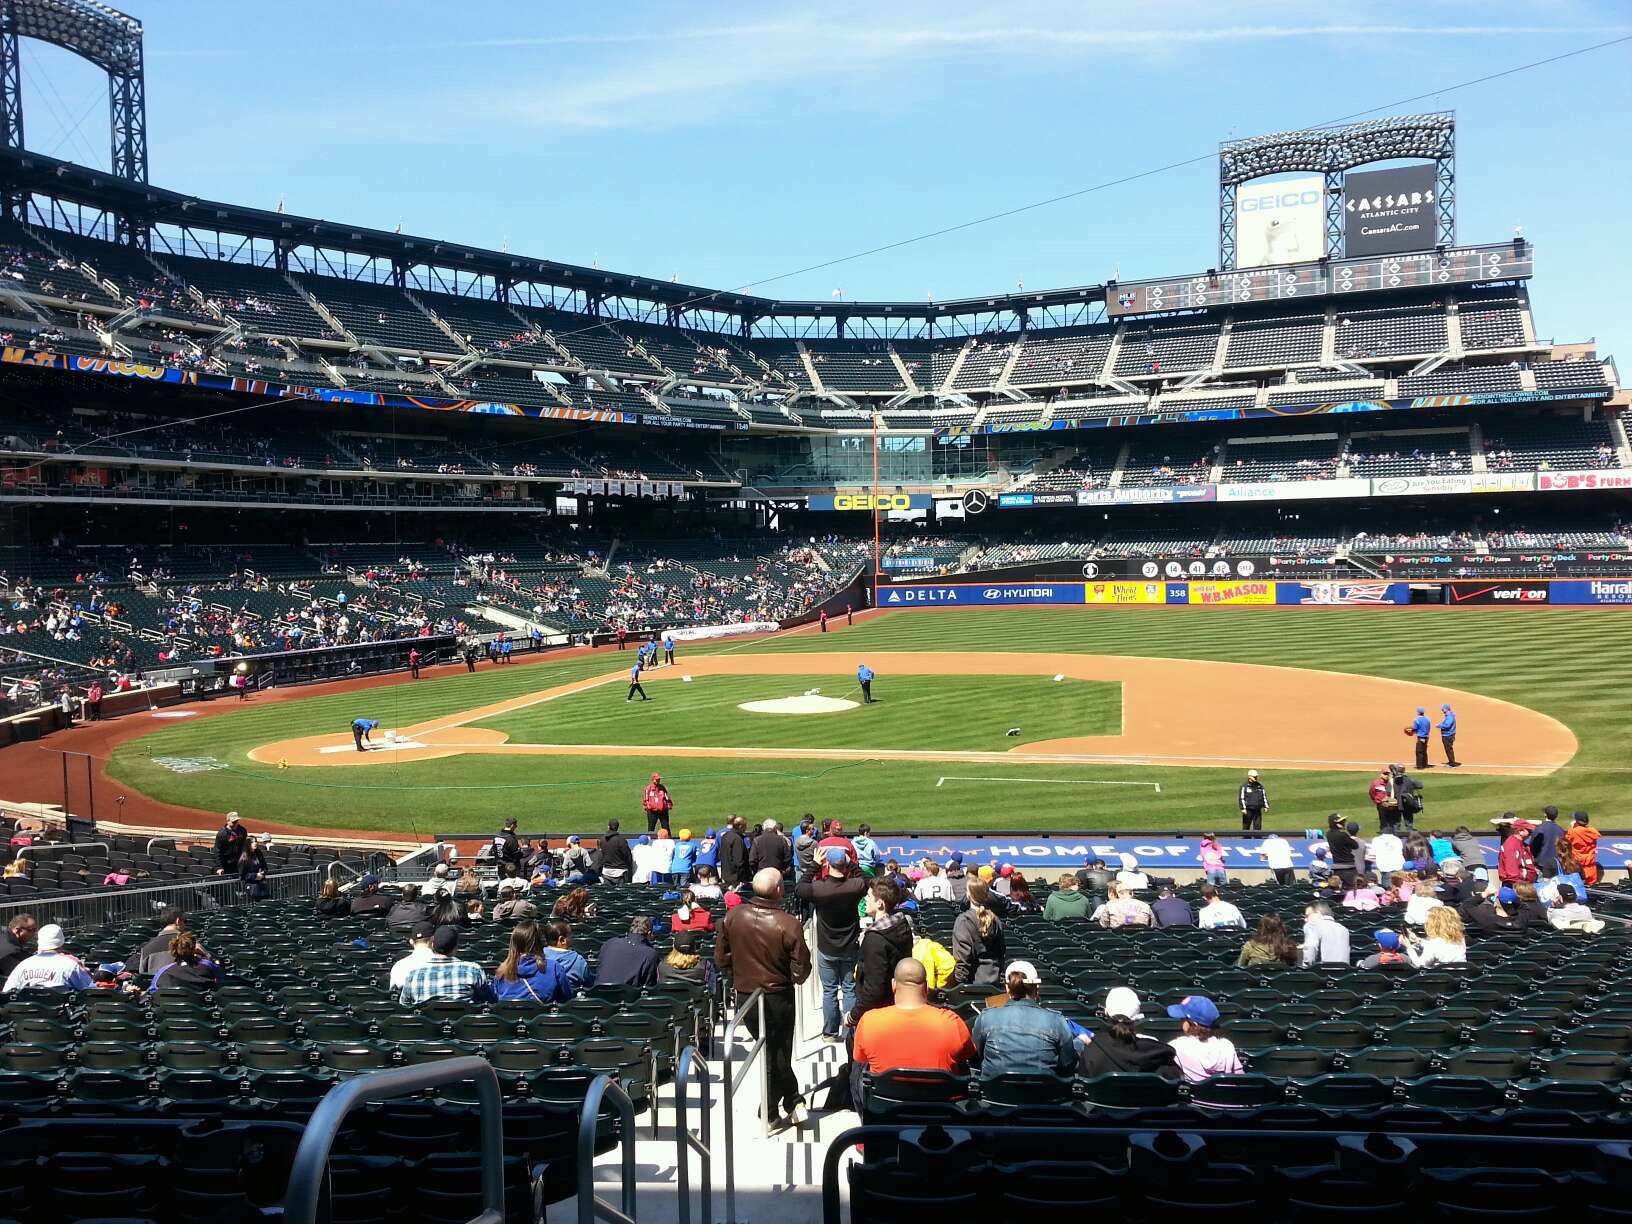 New-Merical Placement at Citi Field - Metsmerized Online